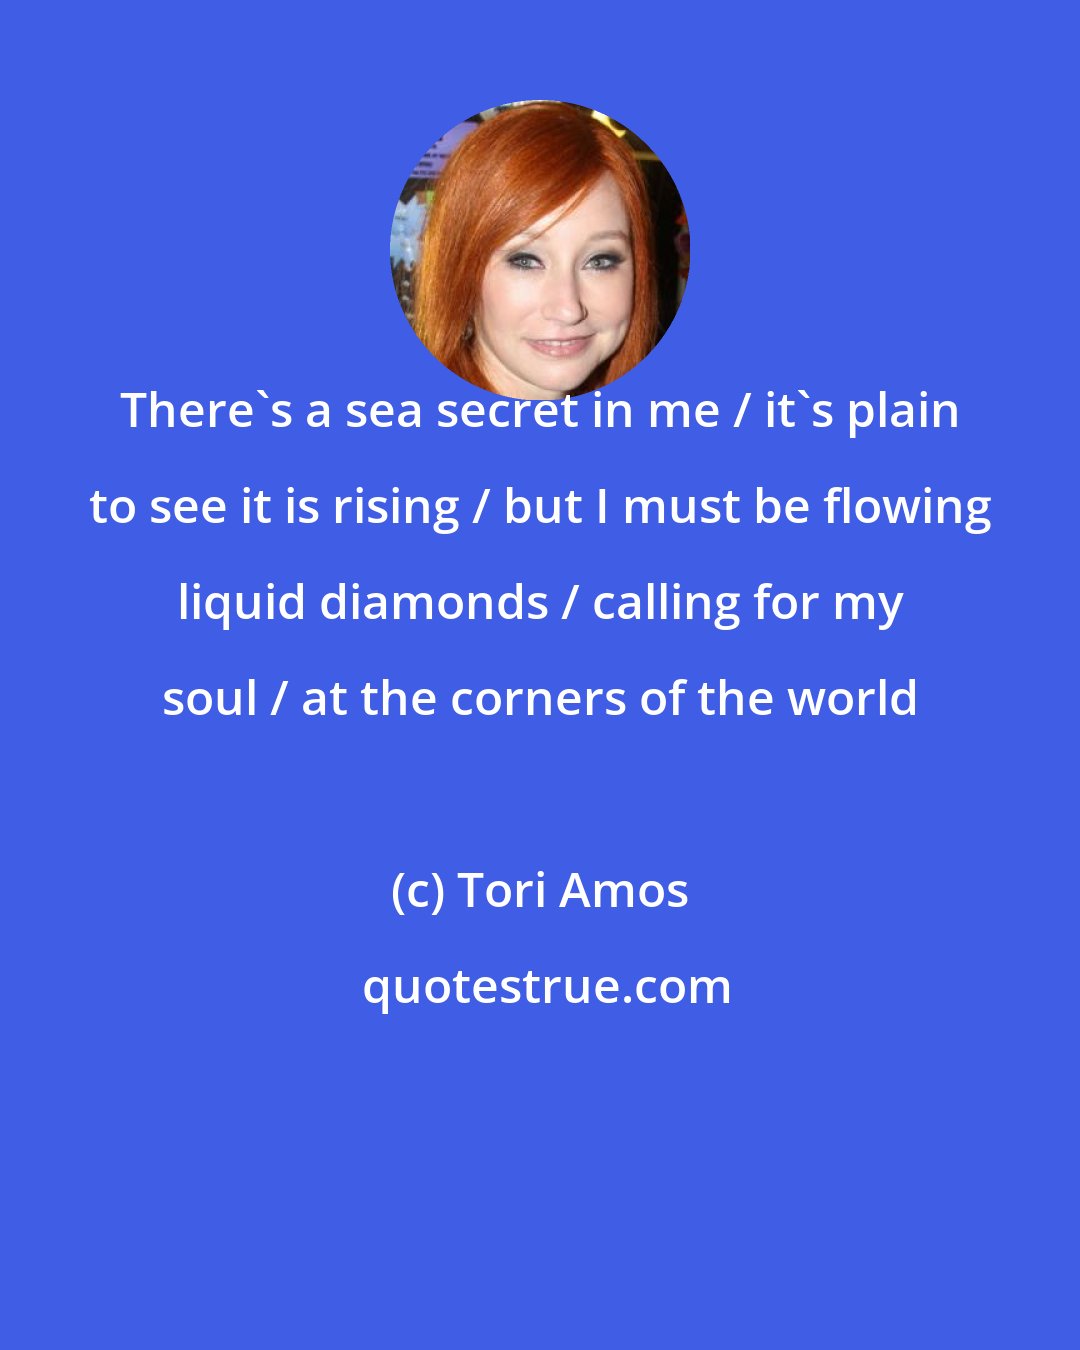 Tori Amos: There's a sea secret in me / it's plain to see it is rising / but I must be flowing liquid diamonds / calling for my soul / at the corners of the world